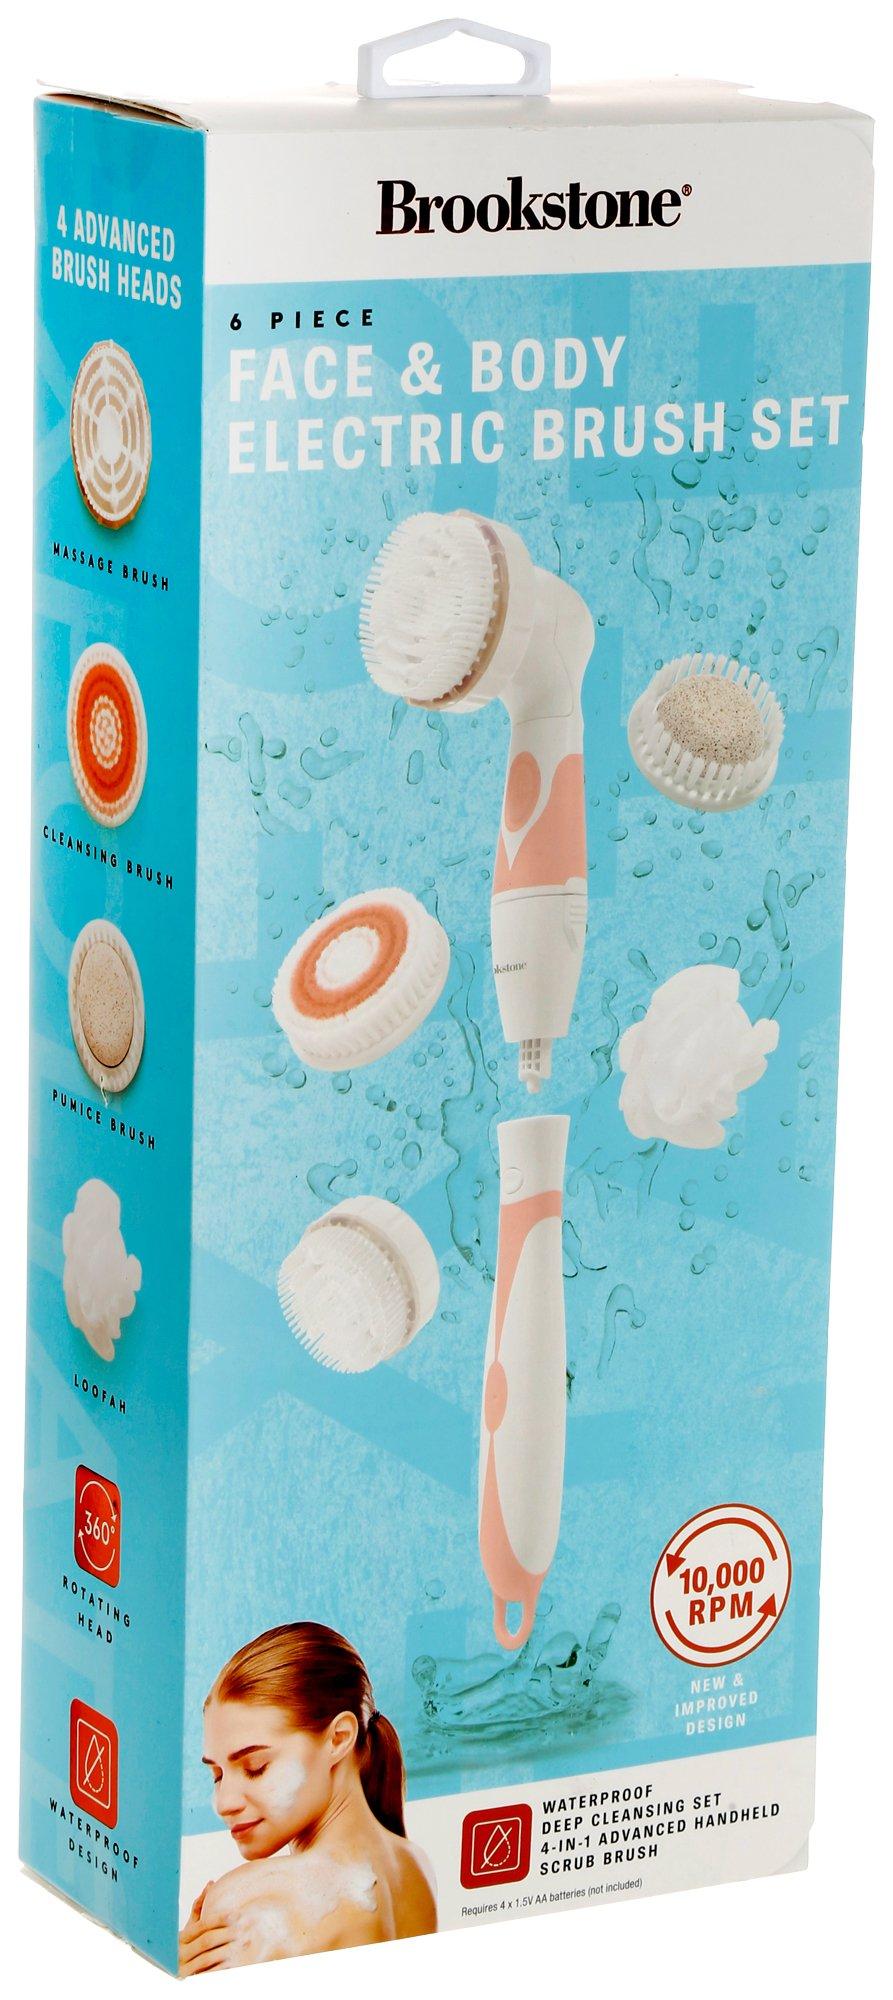 6 Pc Face & Body Electric Brush